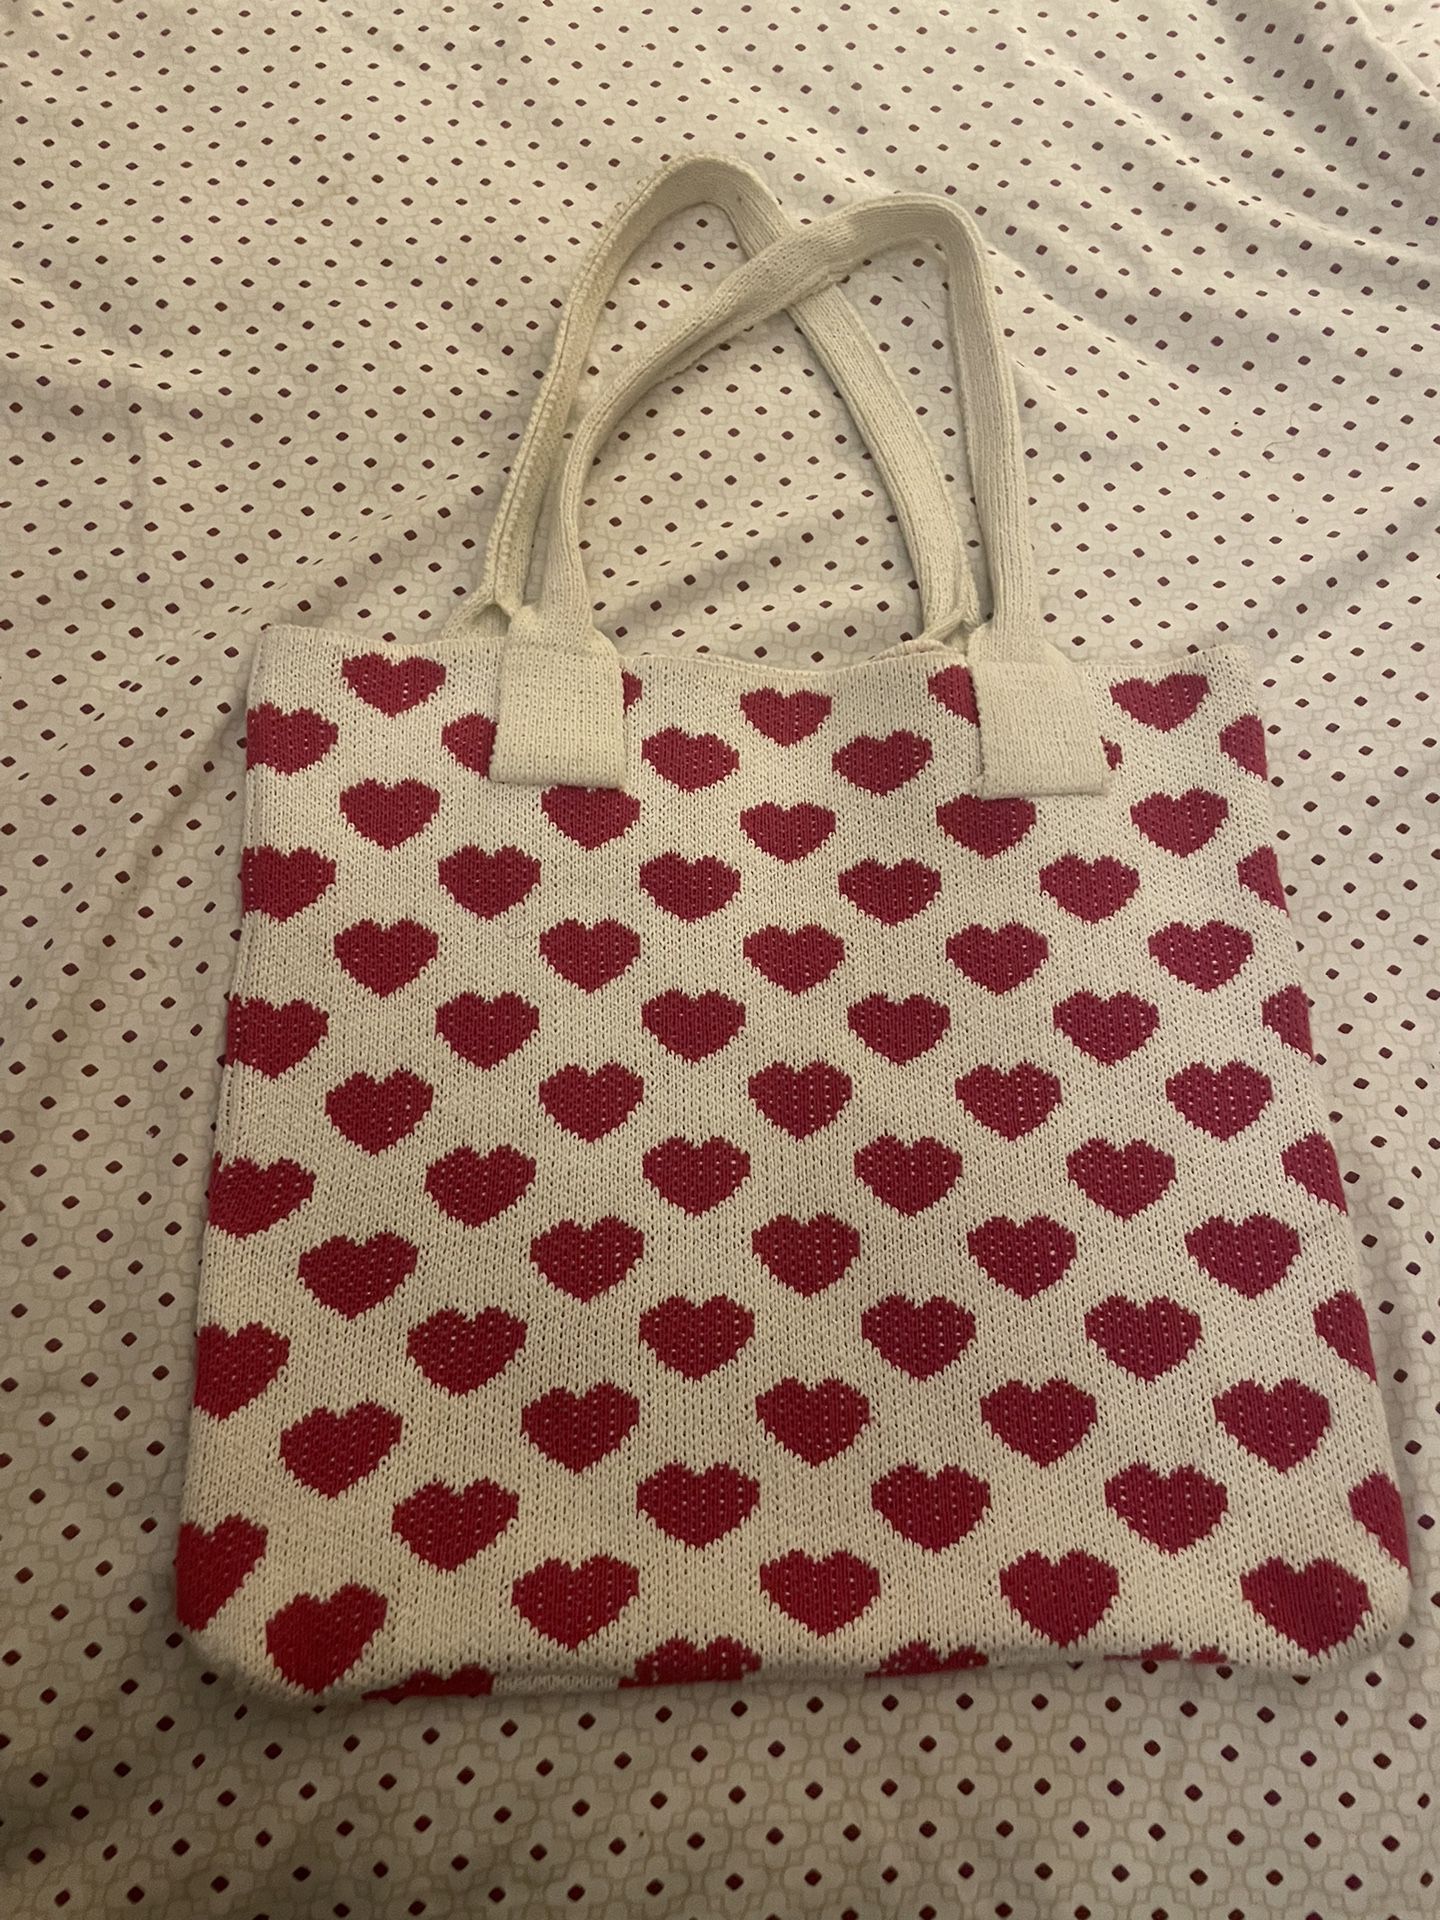 knitted Tote Bag 